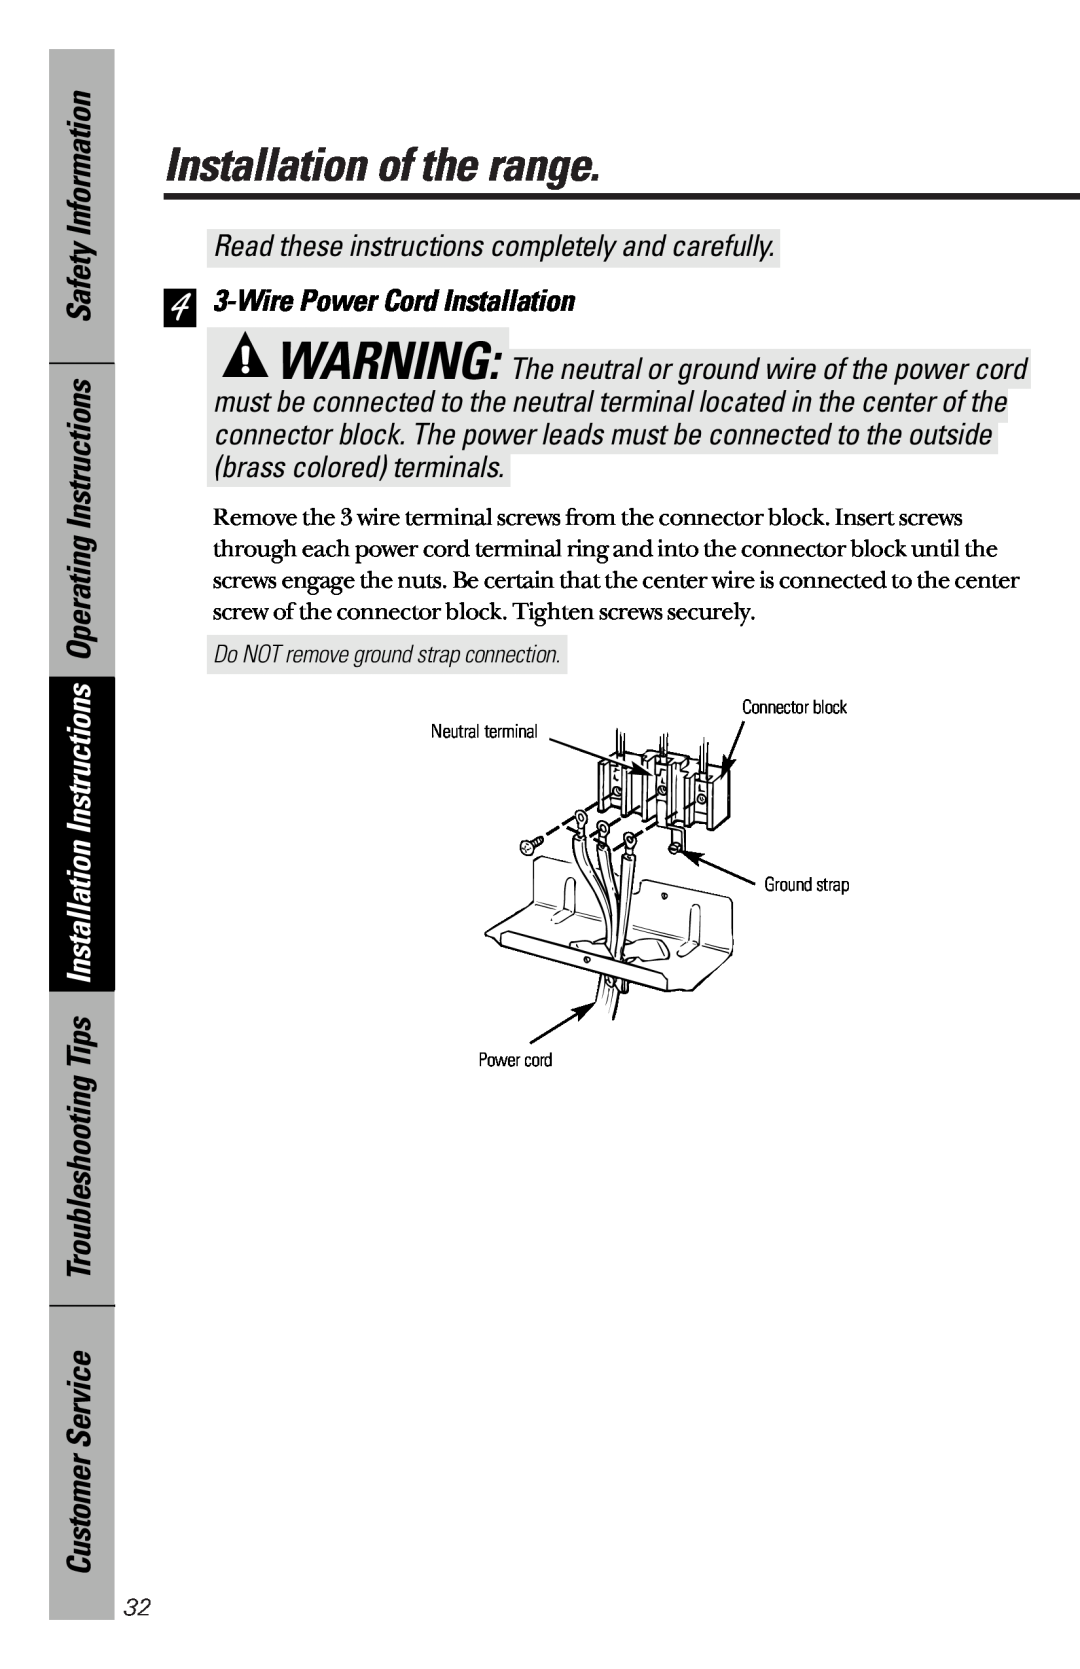 GE 164D3333P172 owner manual 4 3-WirePower Cord Installation, Installation of the range 